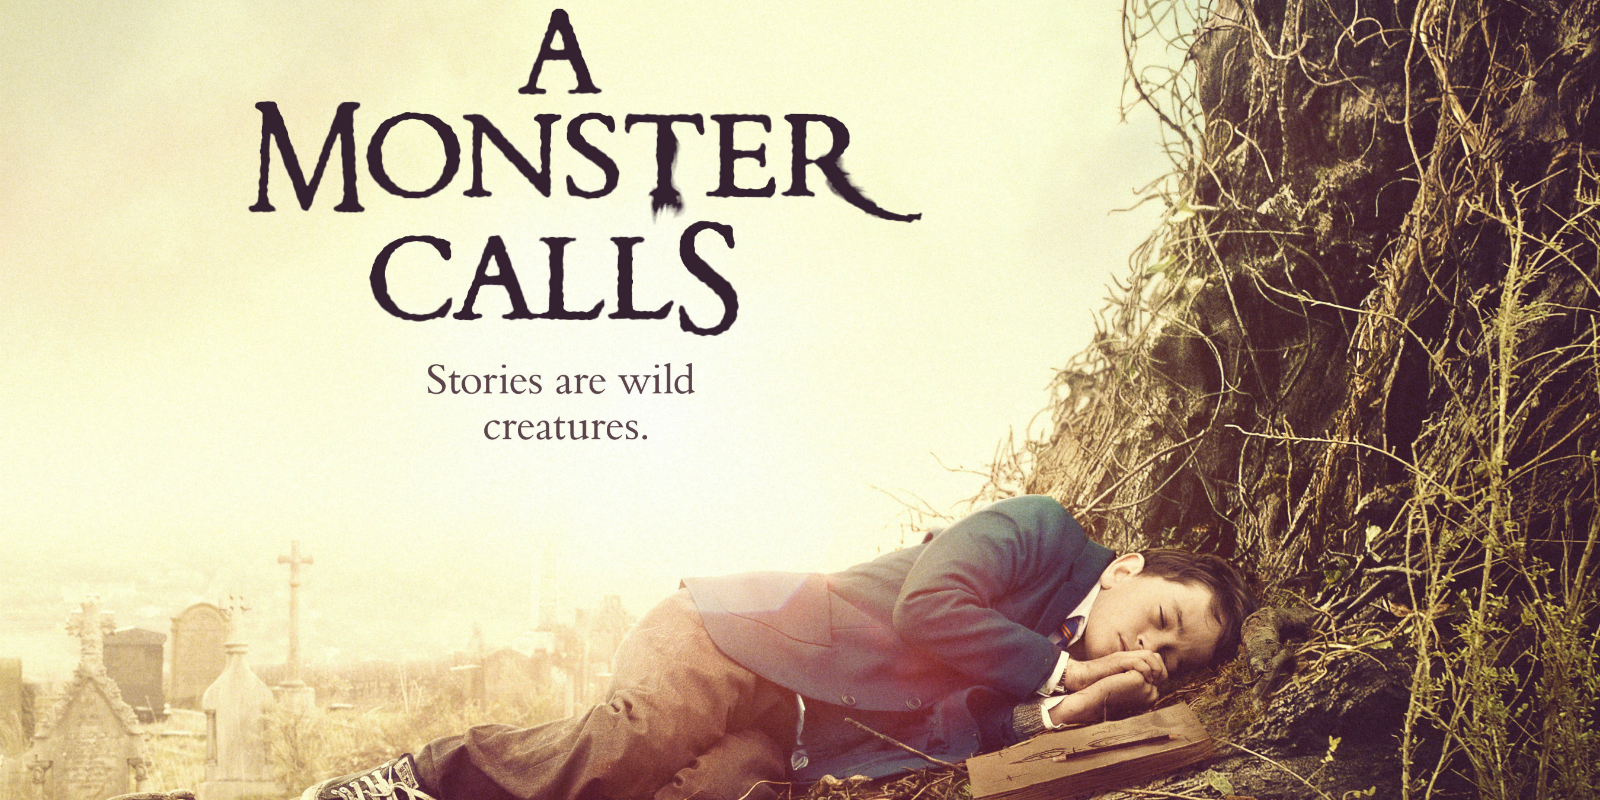 a-monster-calls-2016-trailers-posters.jpg